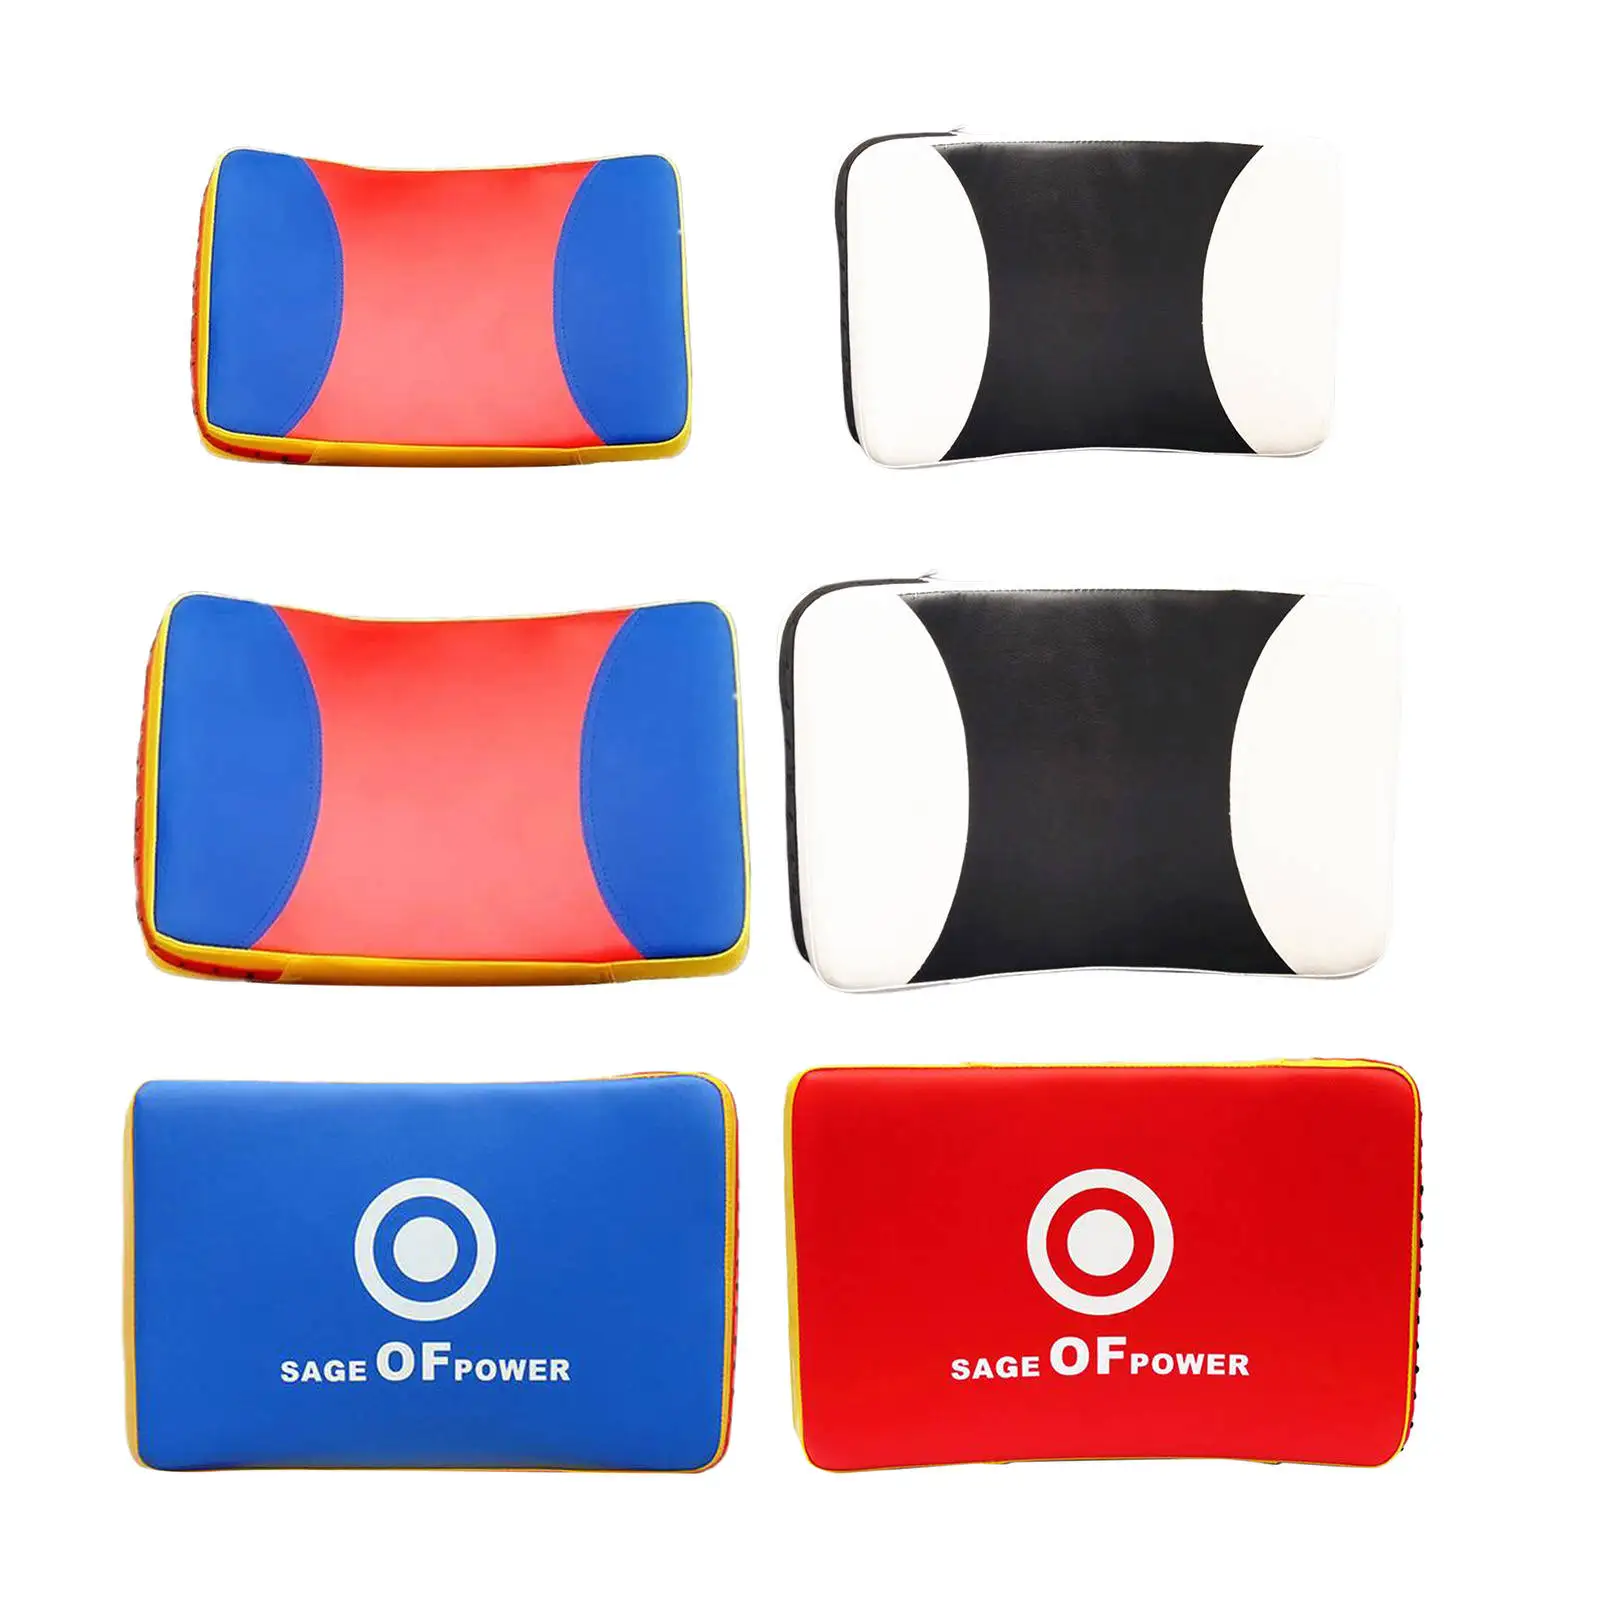 Kick Pads Curved Target Durable Karate Martial Arts Boxing Pads for Women Kids Kickboxing